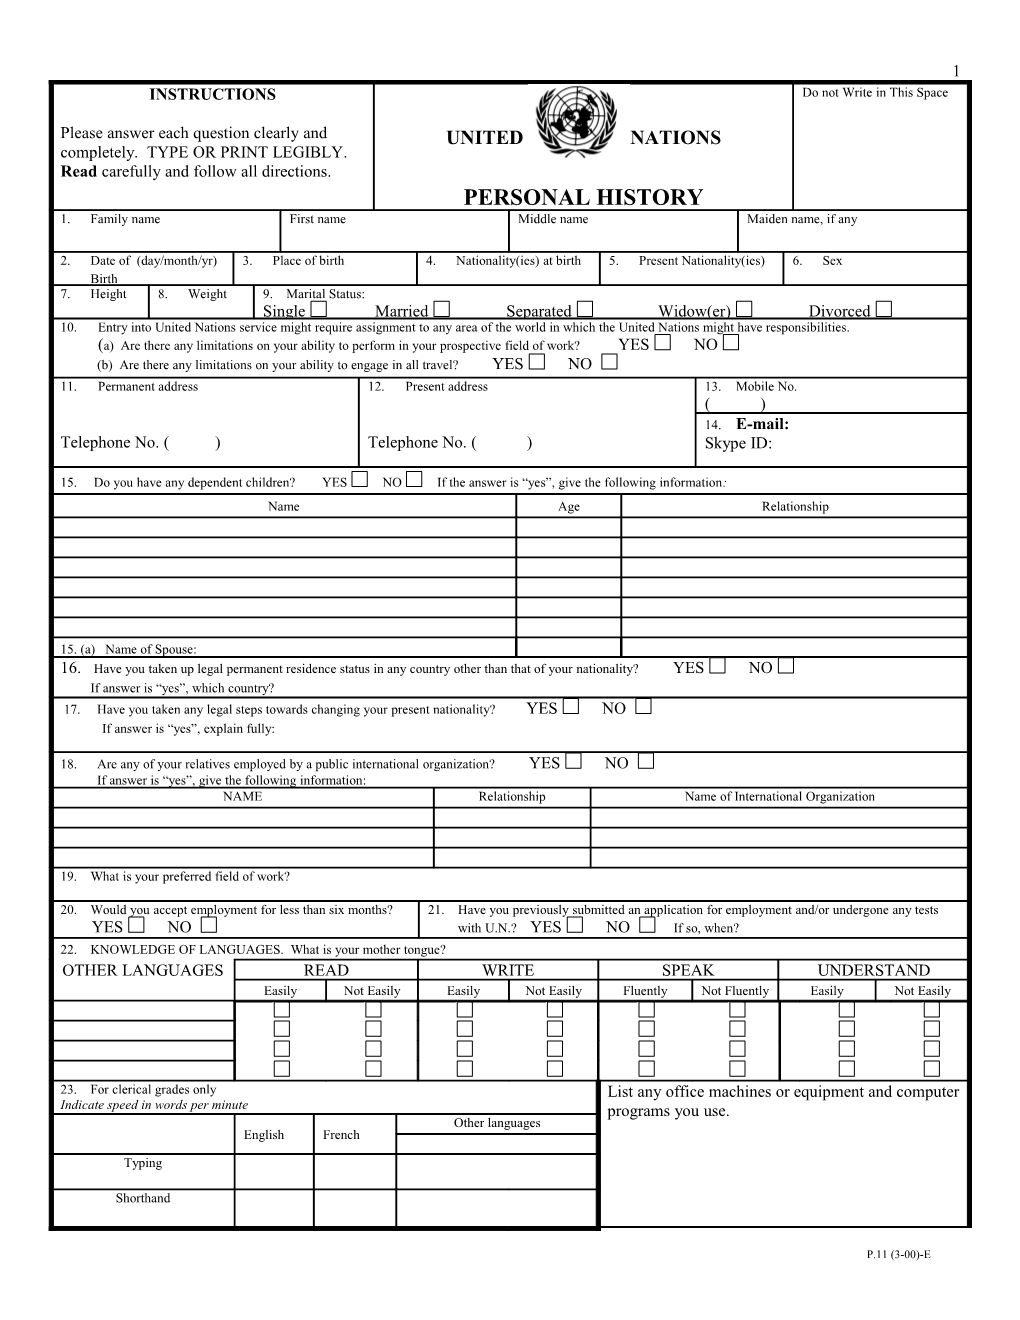 UN Personal History Form PHP P11